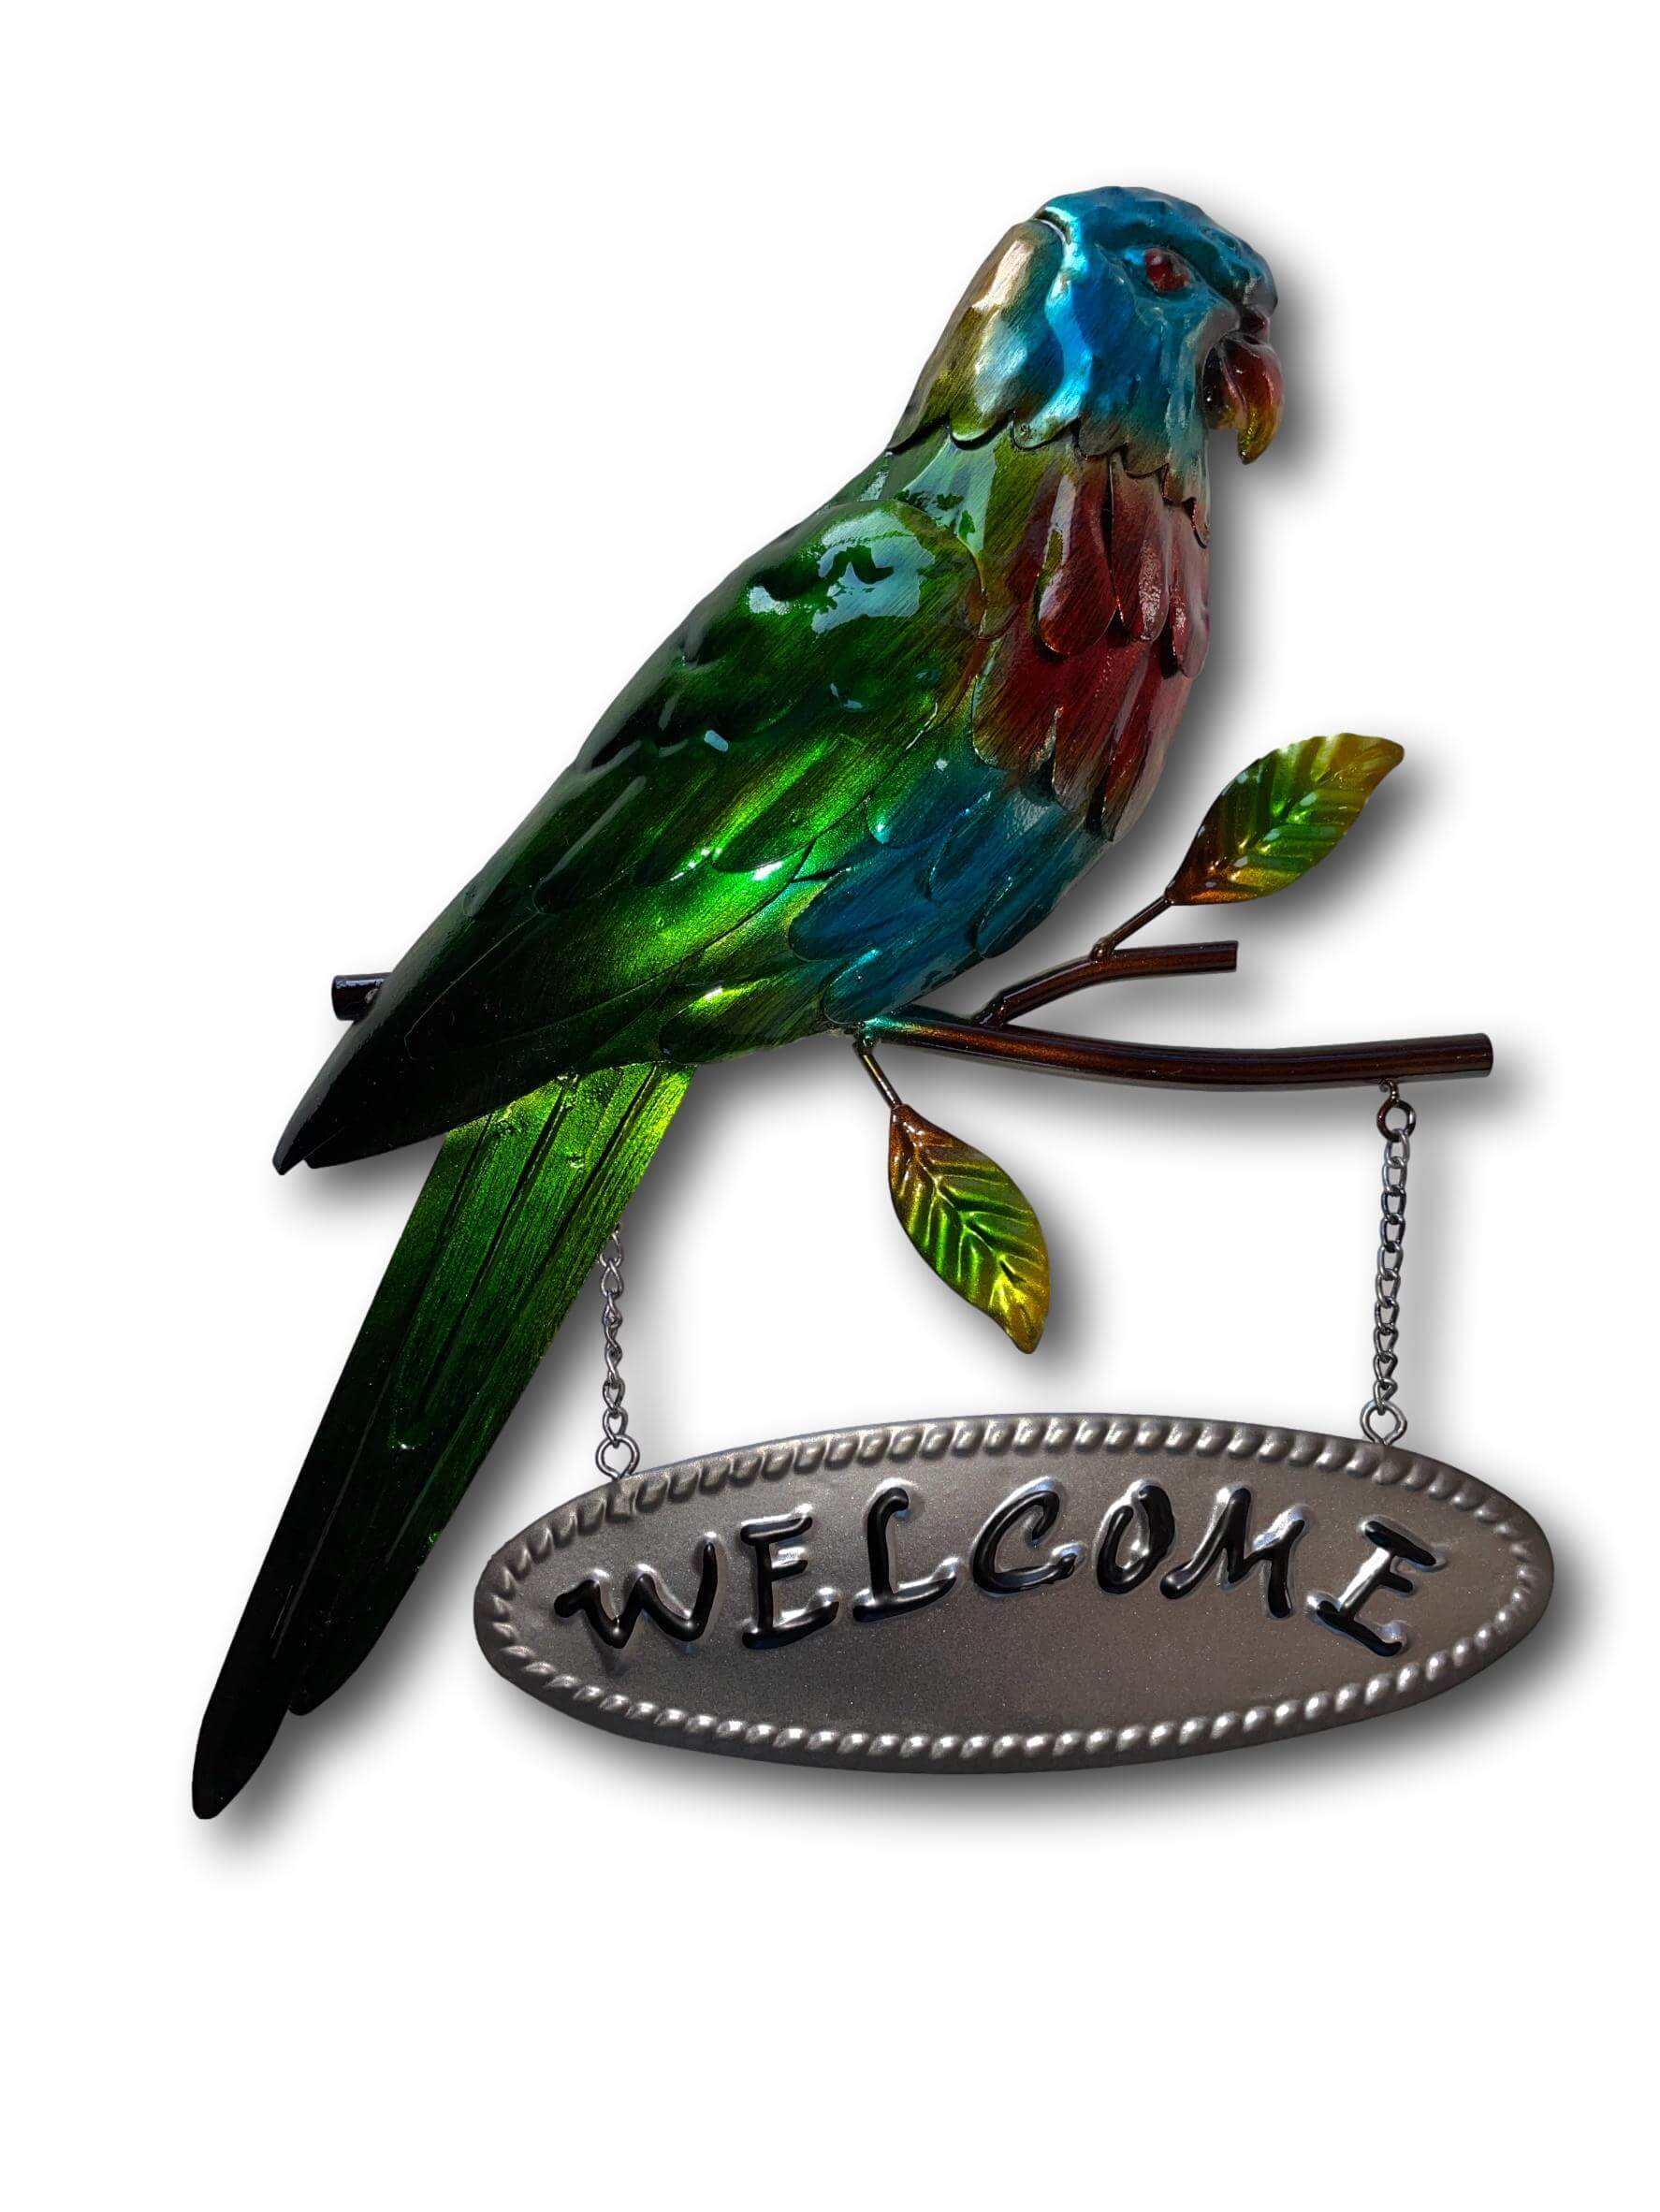 COLOURFUL PARROT WELCOME SIGN WALL ART - HANDMADE METAL ART + SINGING BOWLS AND MEDITATION